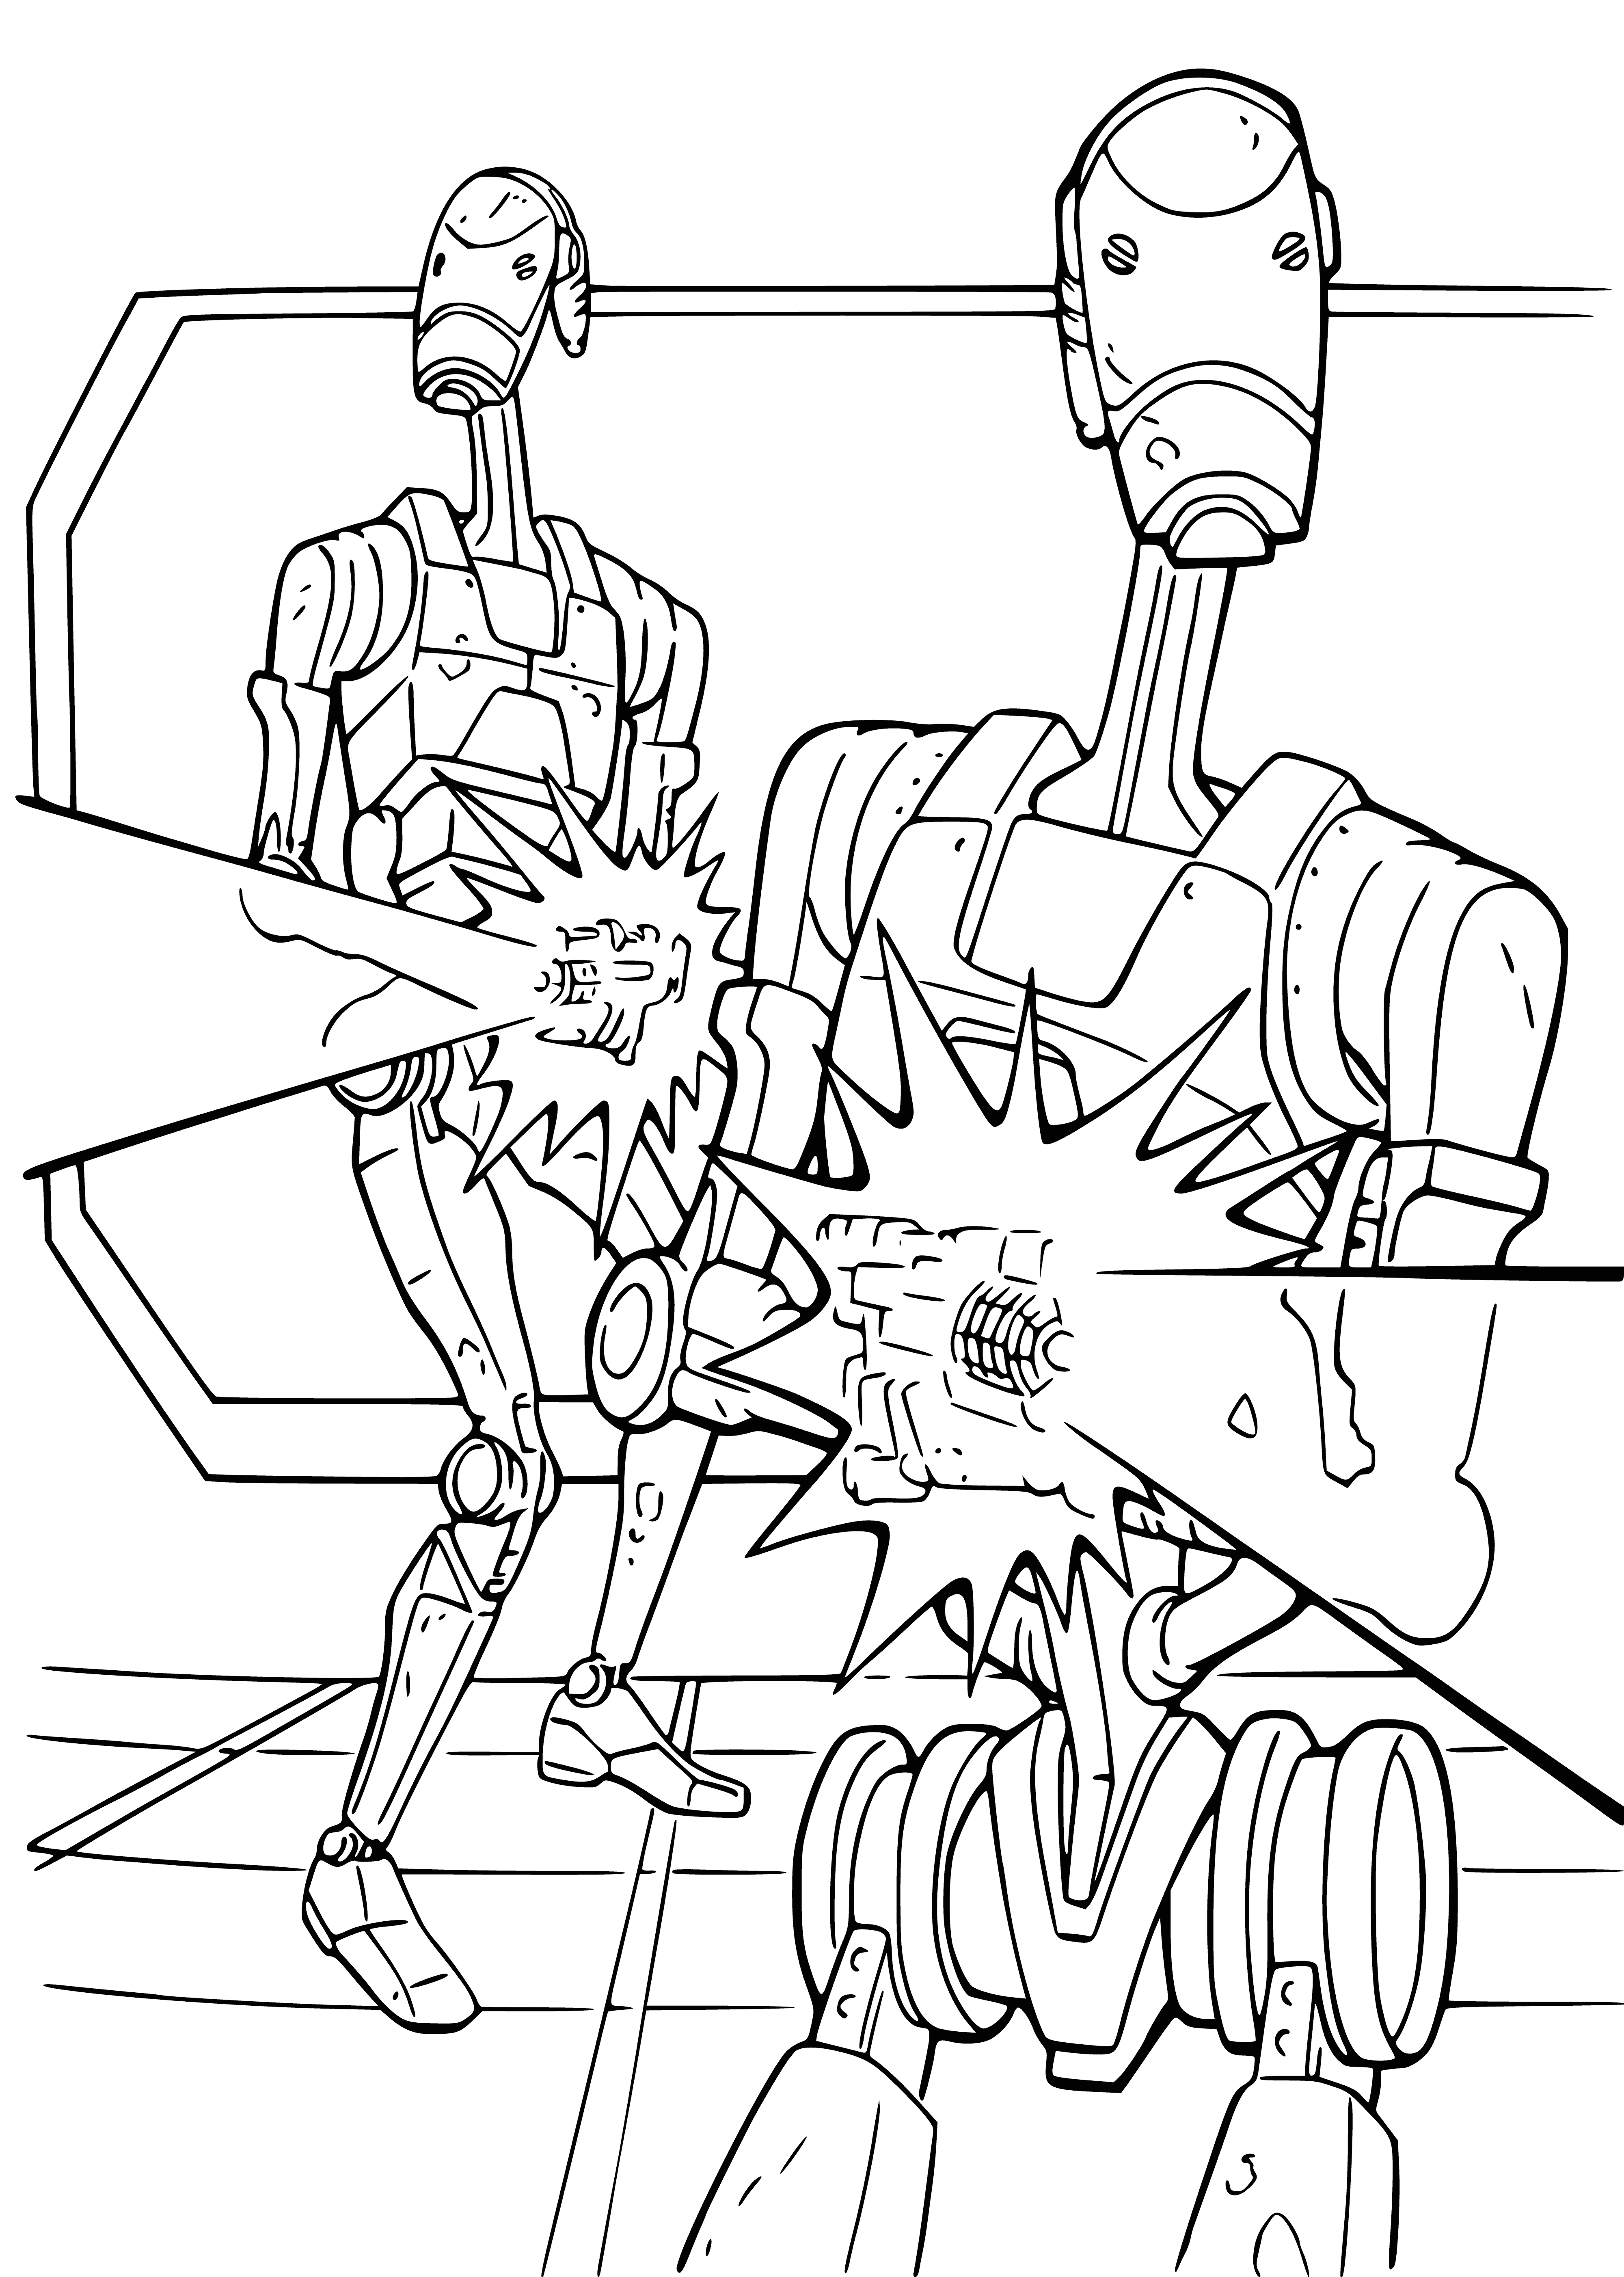 coloring page: Battle droids in line, identical and holding blasters, in front of a big ship. #StarWars